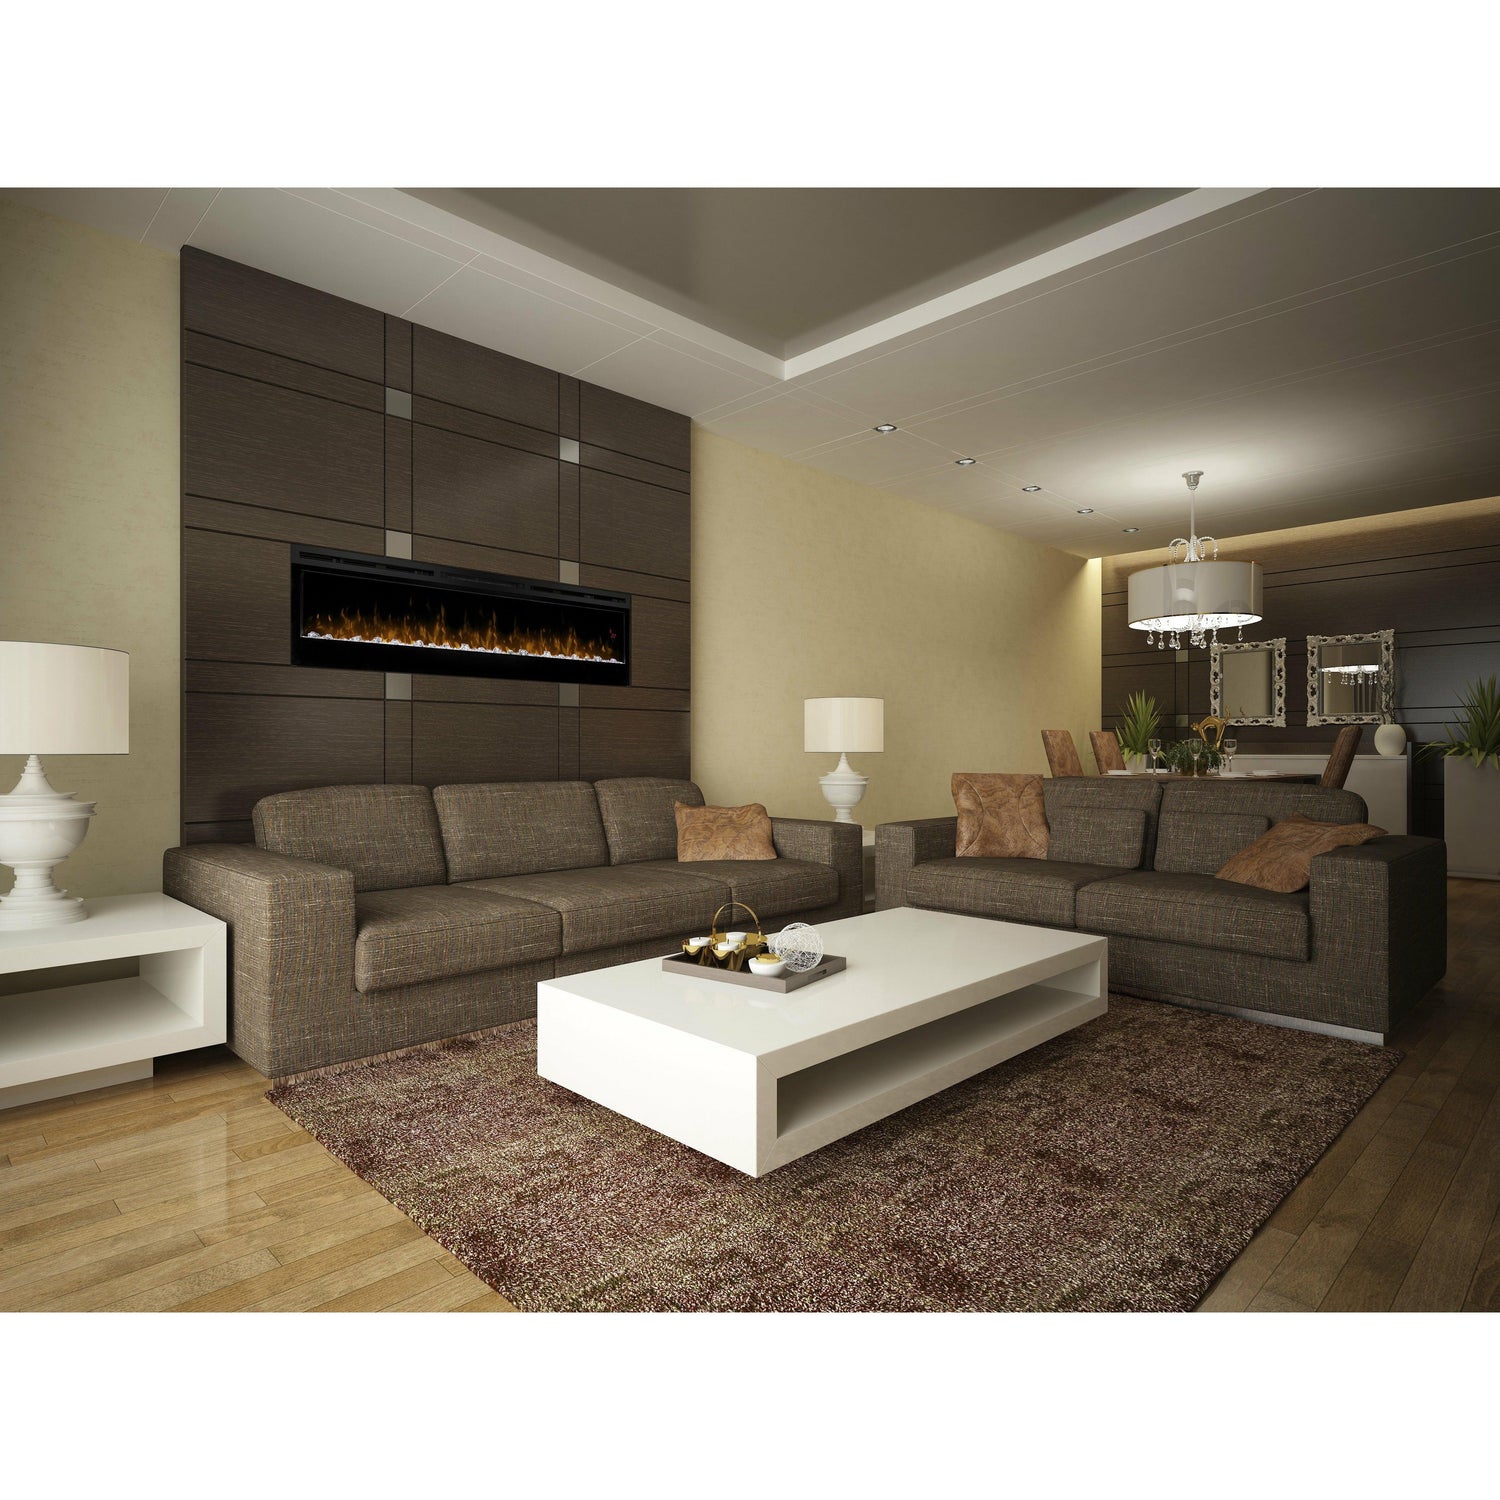 DIMPLEX 50'' PRISIM WALL MOUNTED ELECTRIC FIRE BLACK FINISH W/ICE MEDIA BED OR WHITE PEBBLES - Horizon Leisure